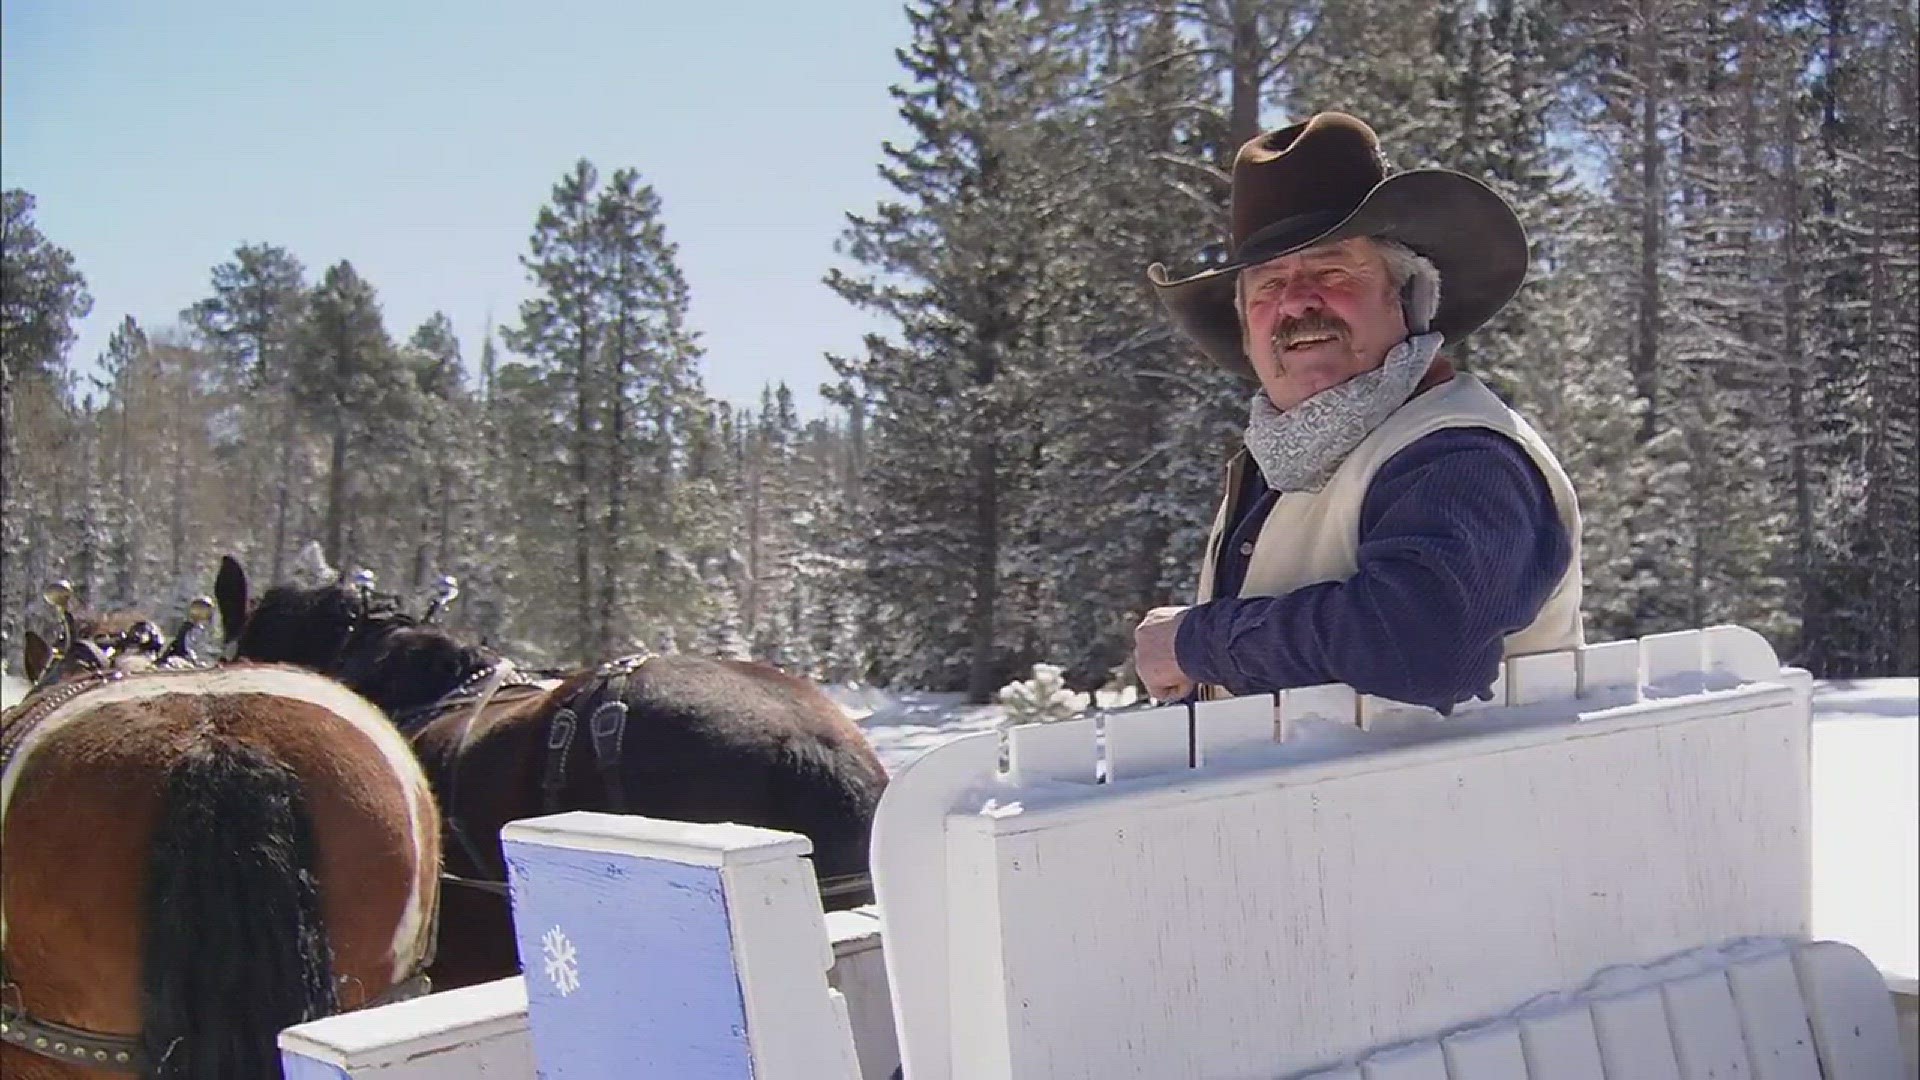 The Sunrise Ski Resorts offer sleigh rides onto the Apache Reservation.